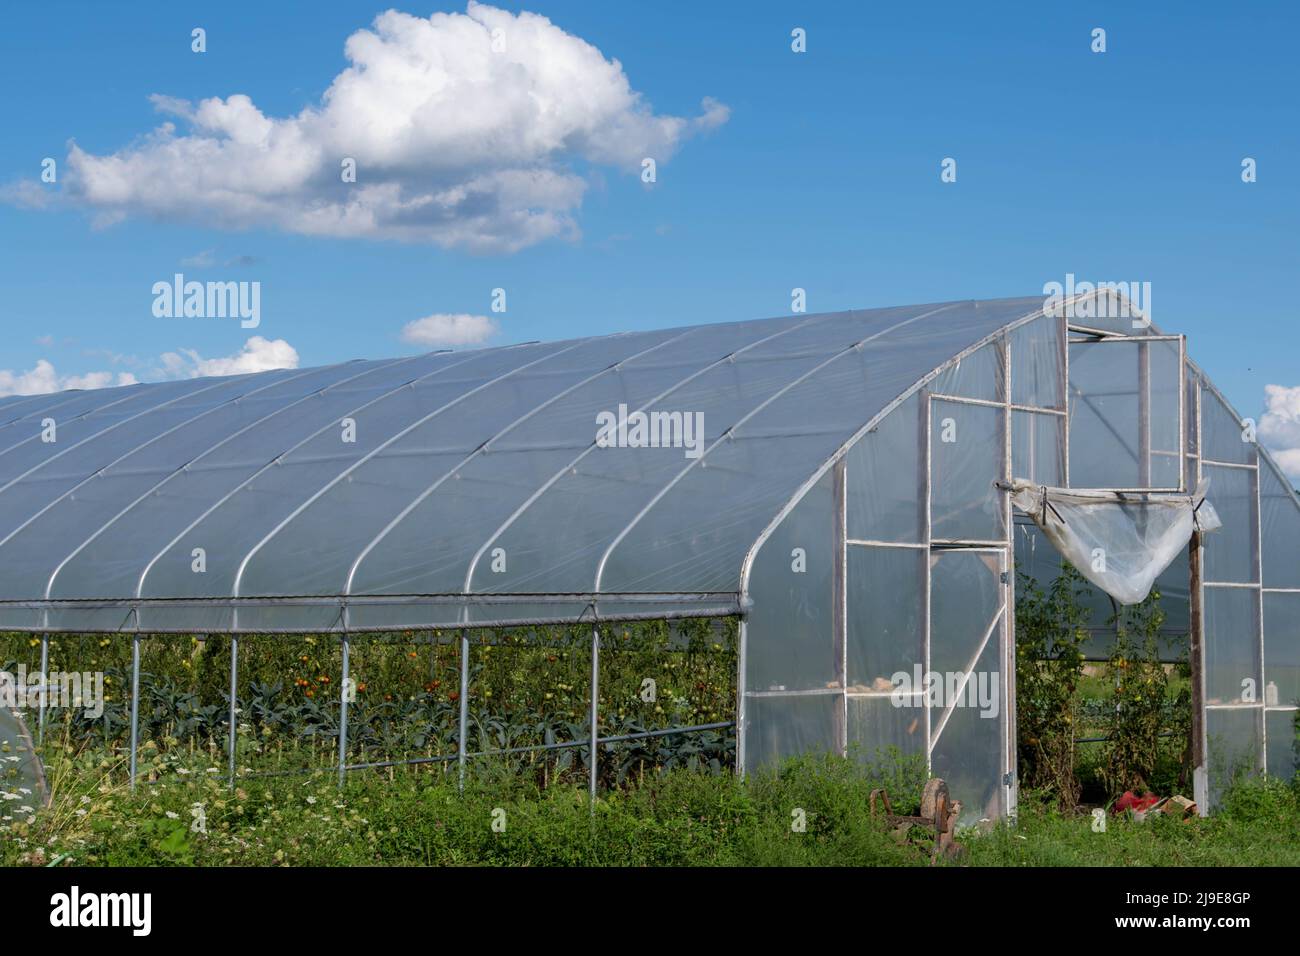 Organic vegetable greenhouse under blue sky with solitary cloud. Stock Photo